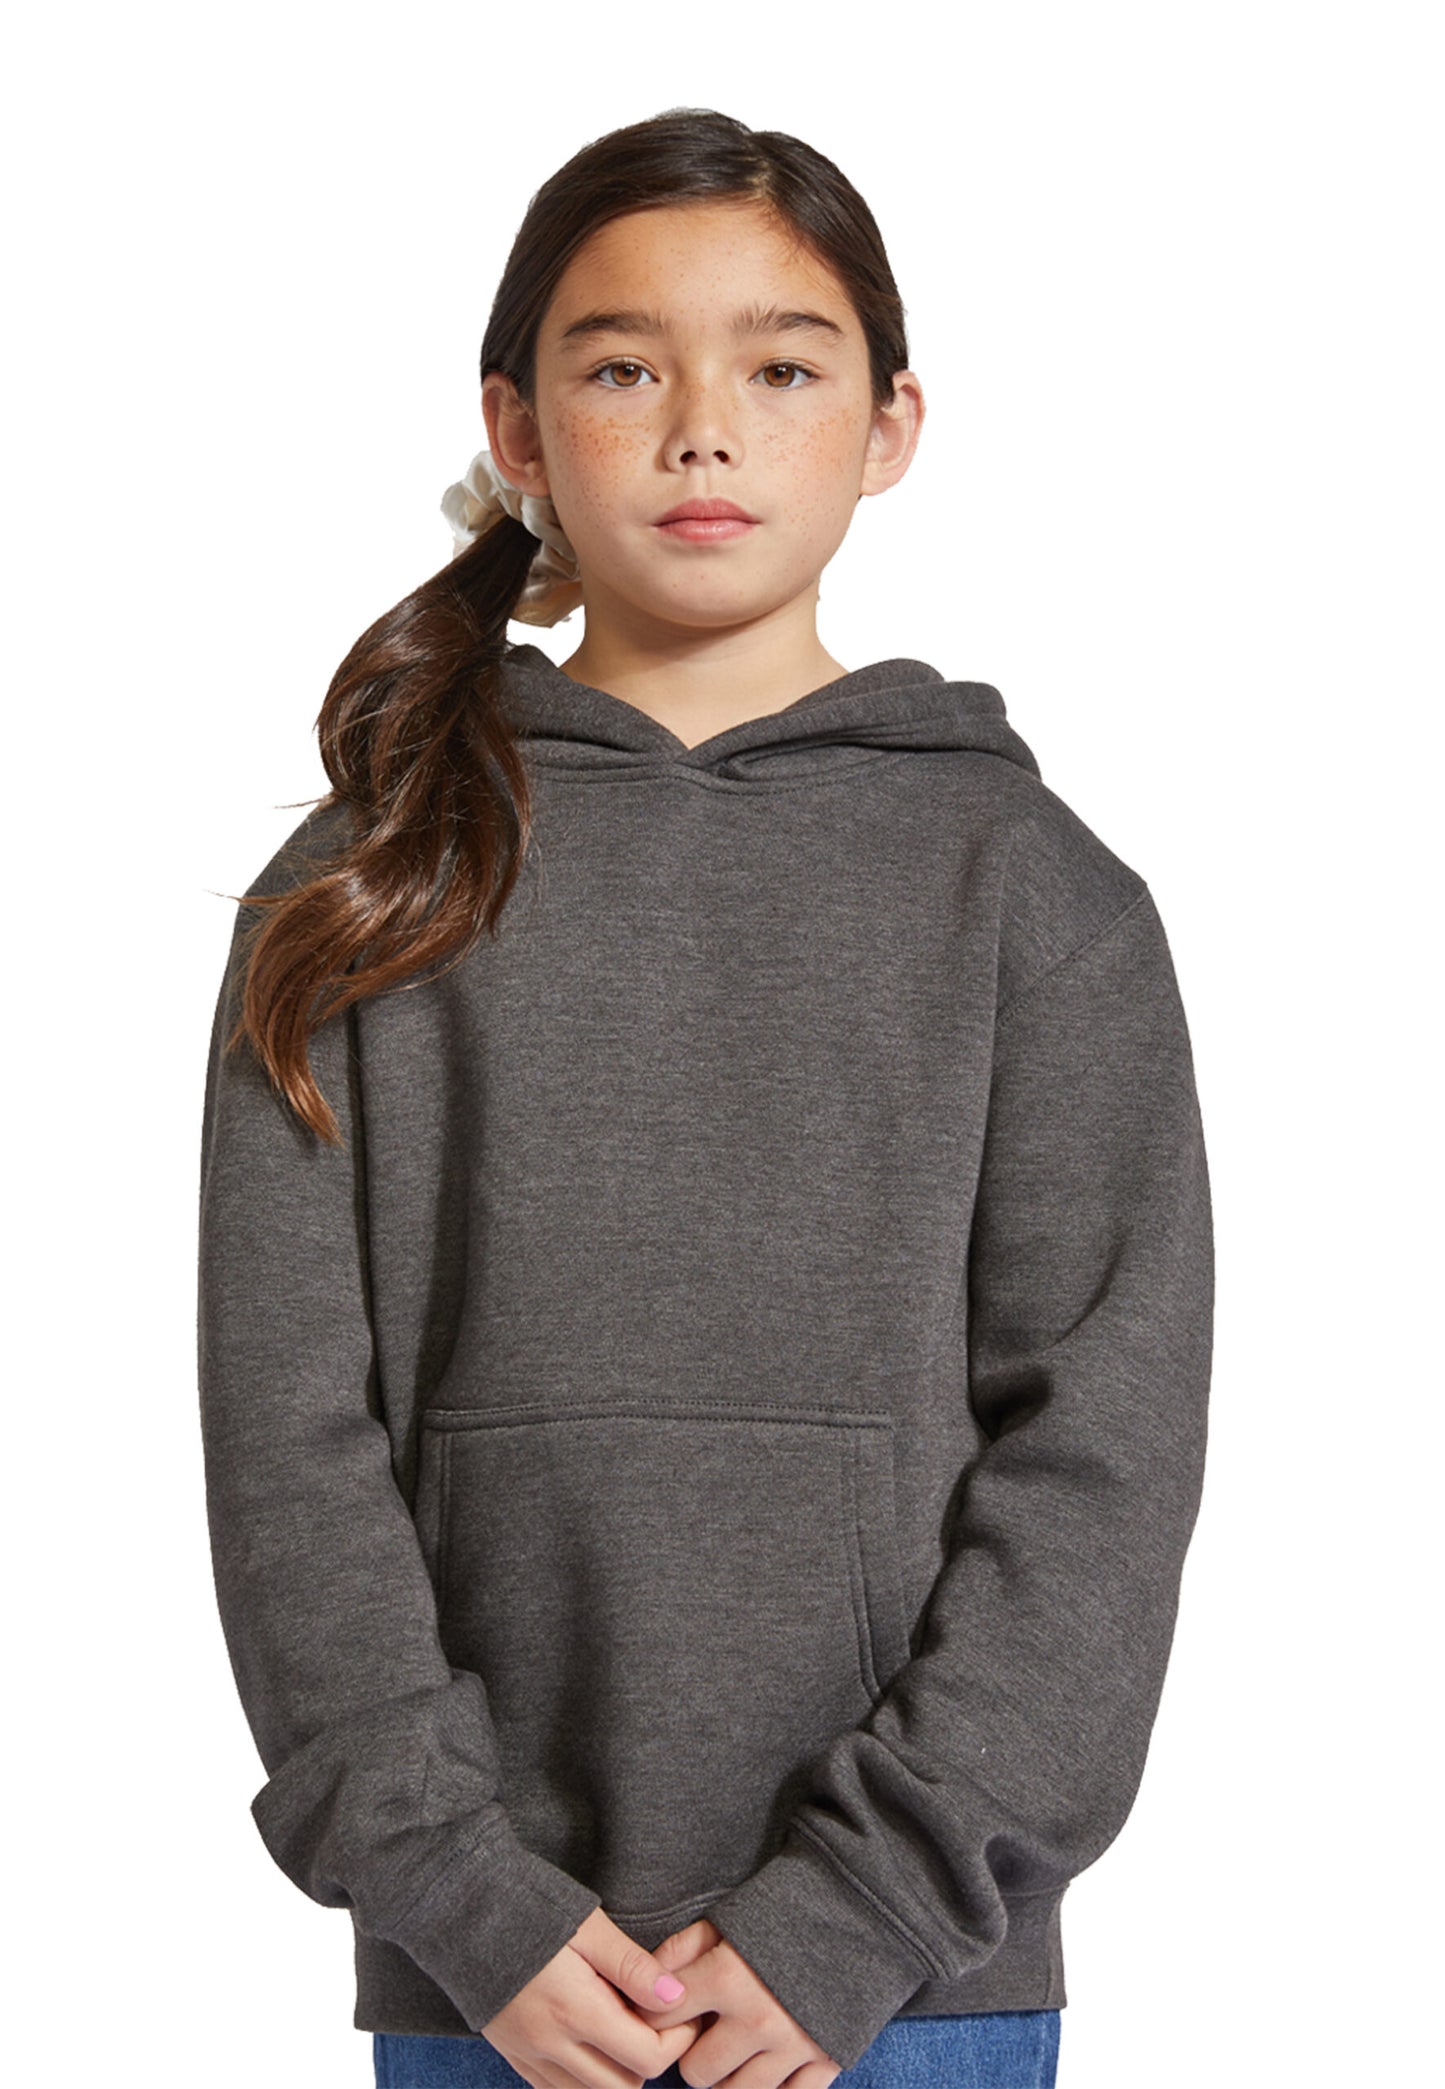 Premium Youth Pullover Hoodie